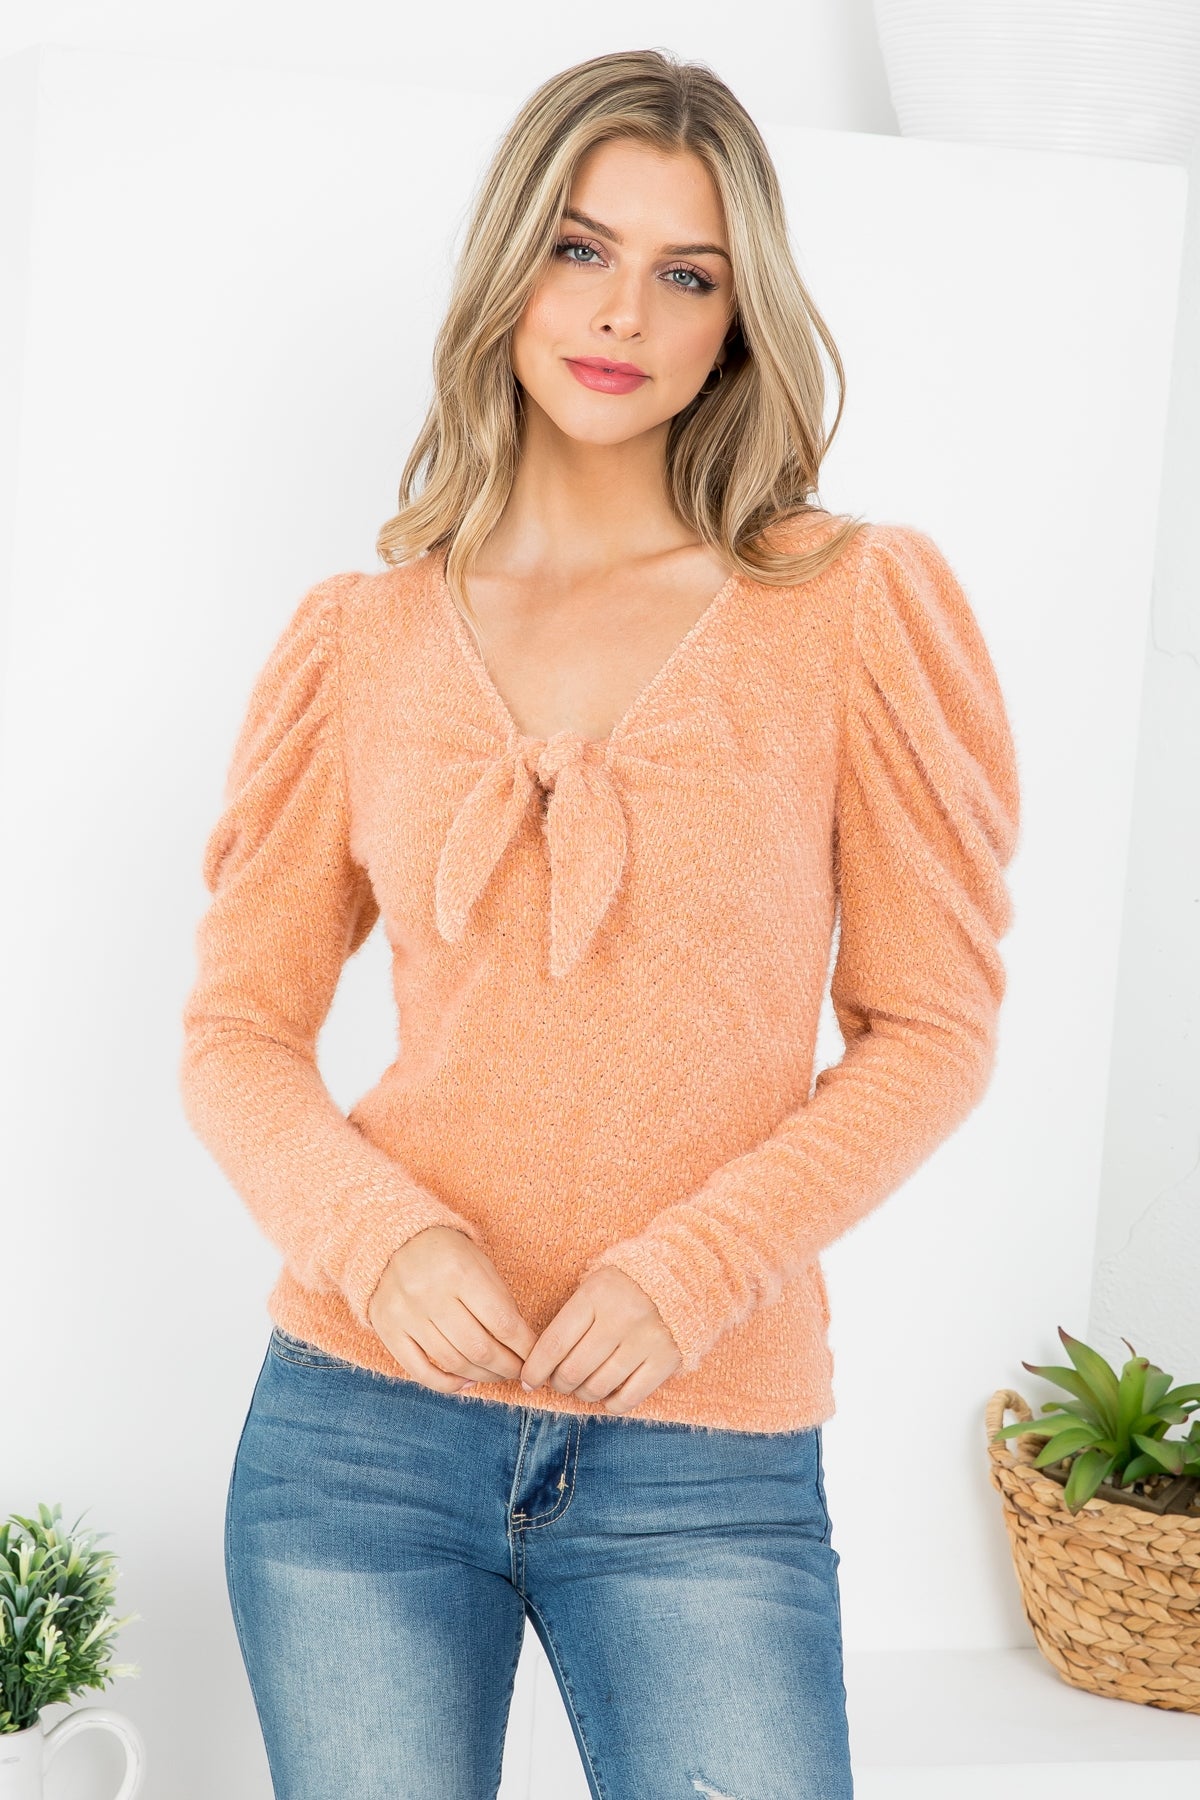 APRICOT FRONT BOW-TIE V-NECKLINE PUFFY SHOULDER SLEEVE TOP 3-2-1 (NOW $2.50 ONLY!)